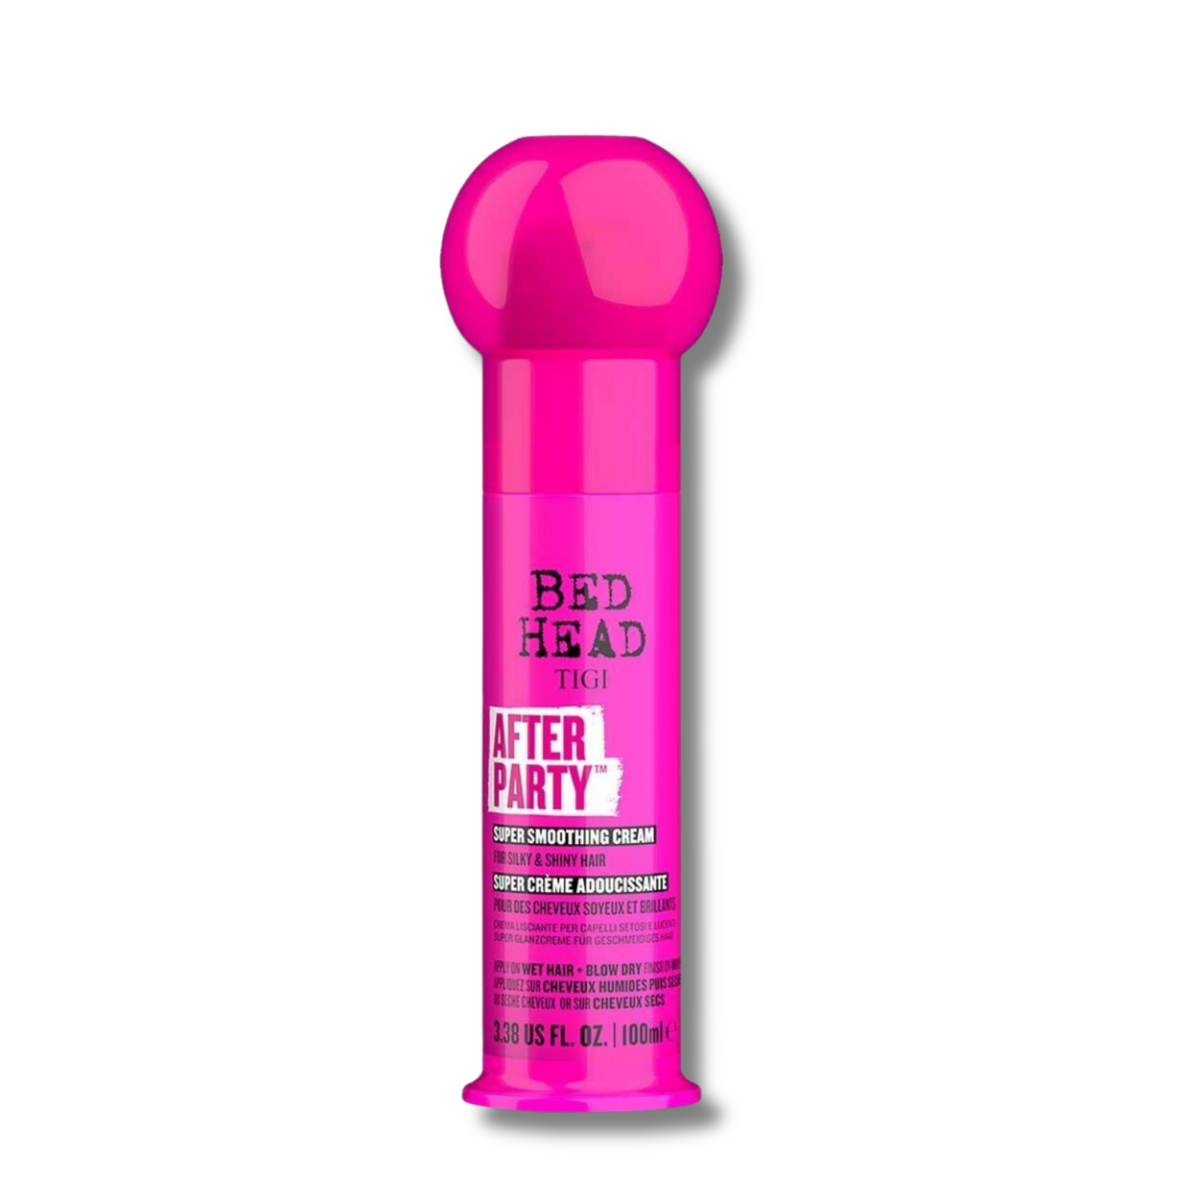 Bed Head TIGI After Party Smoothing Cream For Silky and Shiny Hair (100ml) Tigi Bed Head